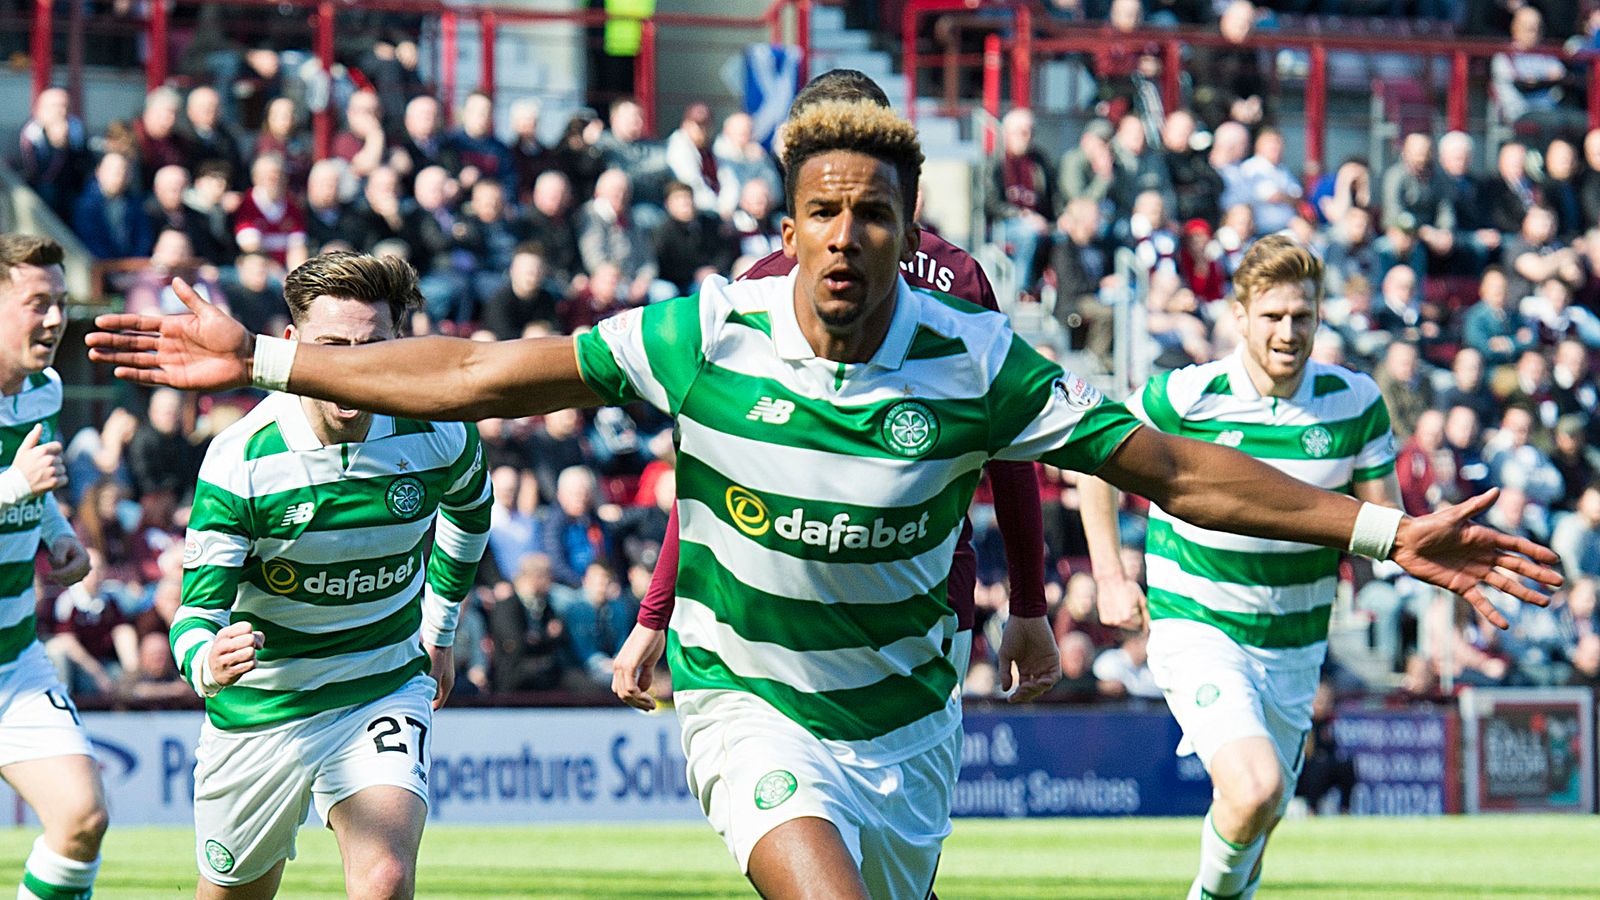 Hearts 0 - 5 Celtic - Match Report & Highlights1600 x 900